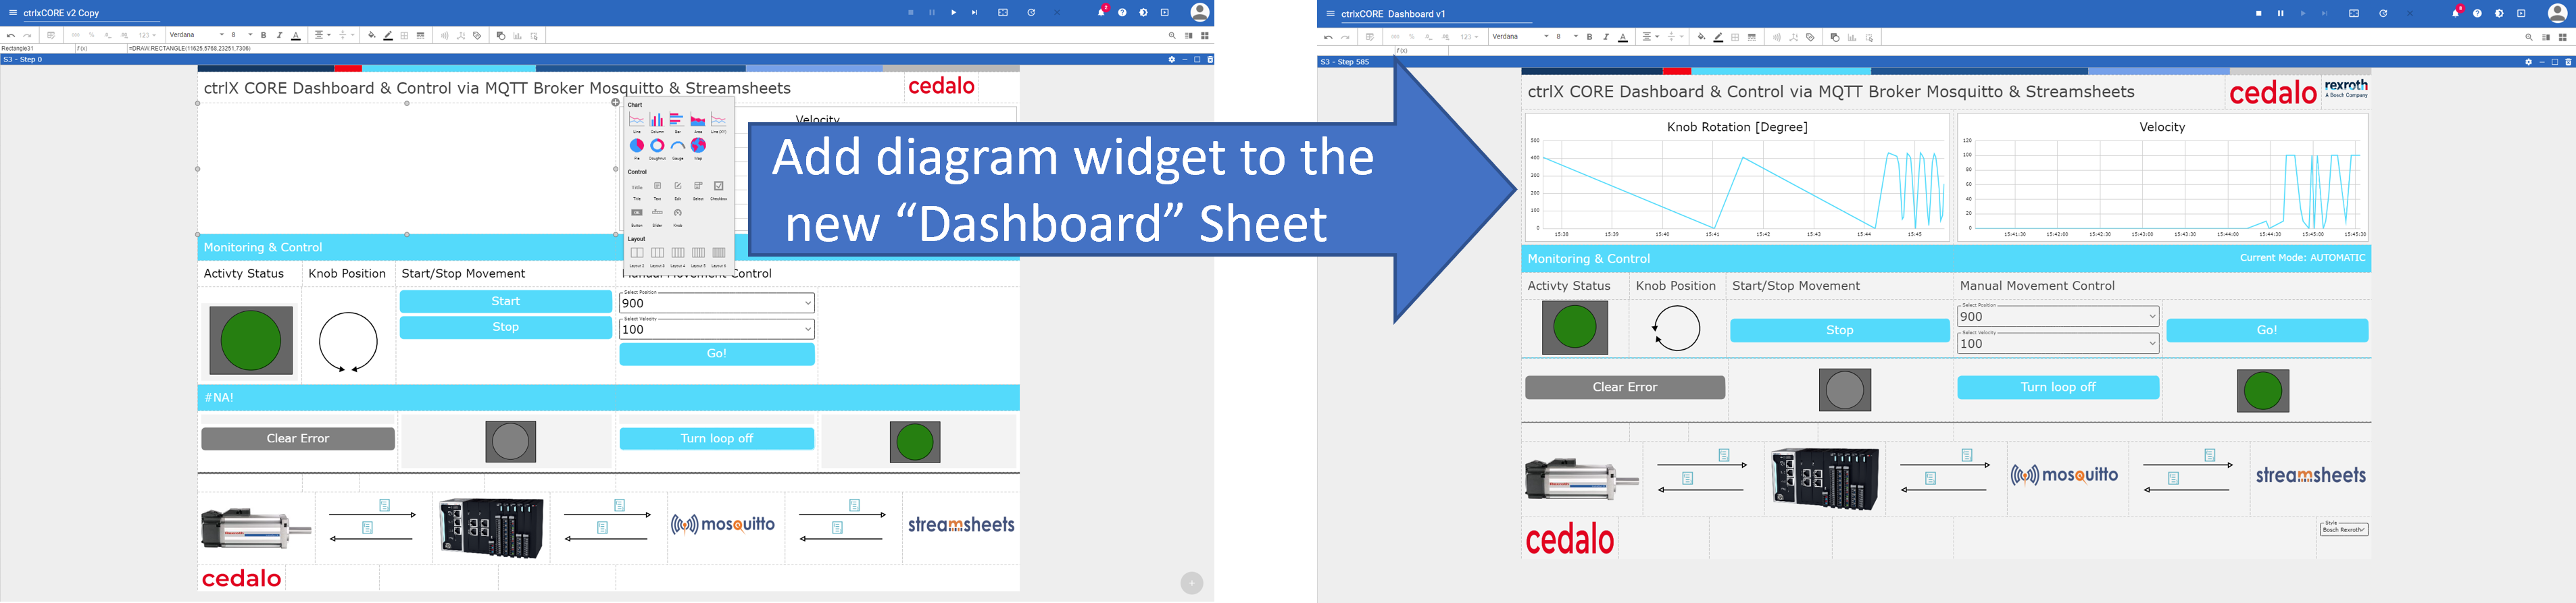 Figure 1 - The new sheet type "Dashboard" in Streamsheets 2.5 offers a grid matrix to add widgets, data, and graphs.